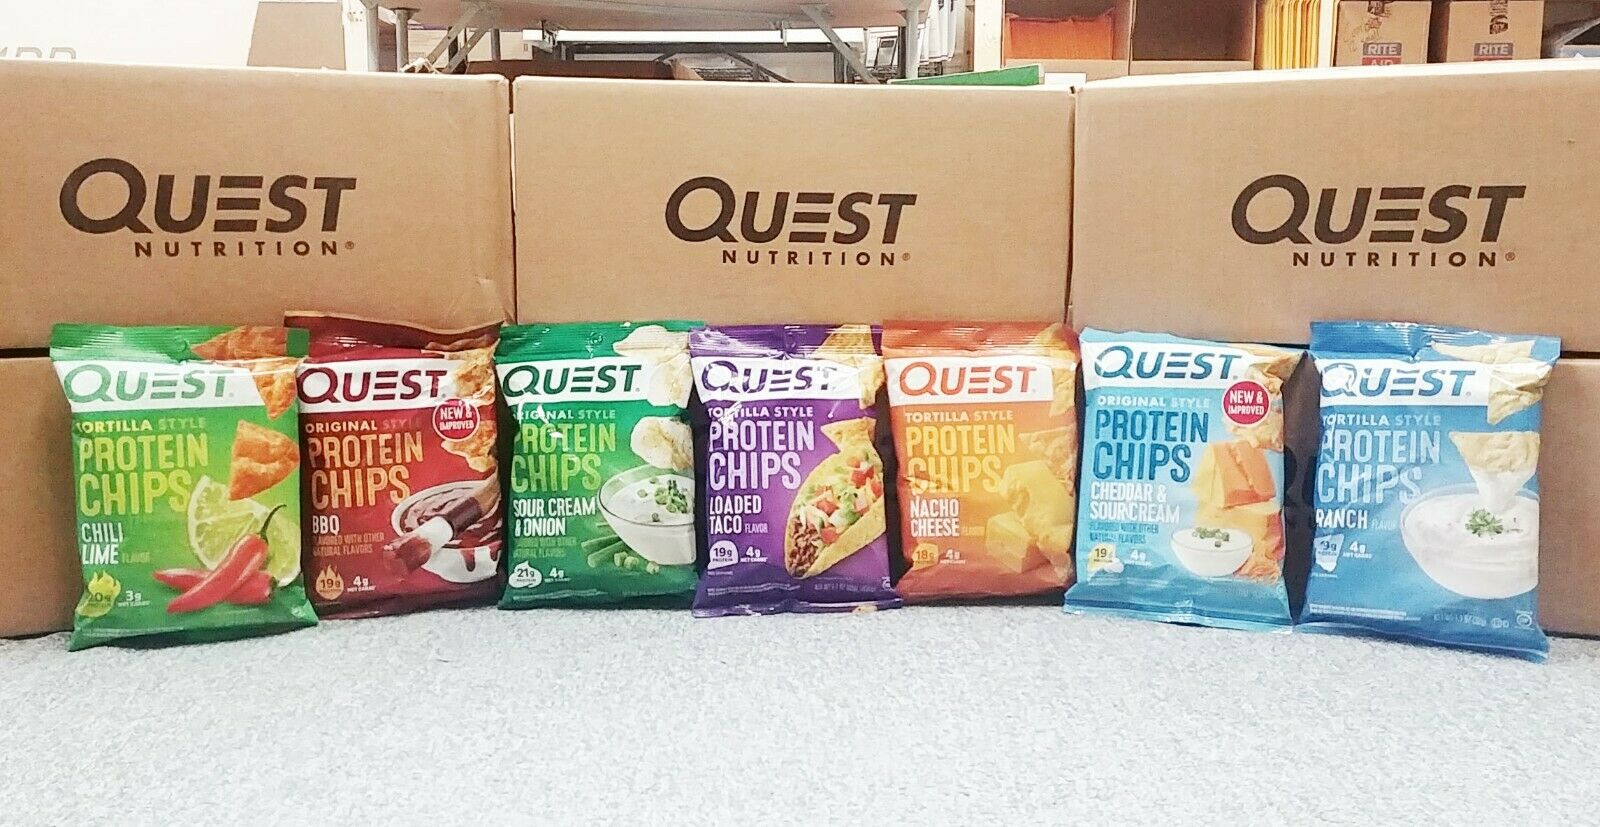 Quest Protein Chips 22g Protein 2g Net Carb - 12 Pack - New 12 Count Package